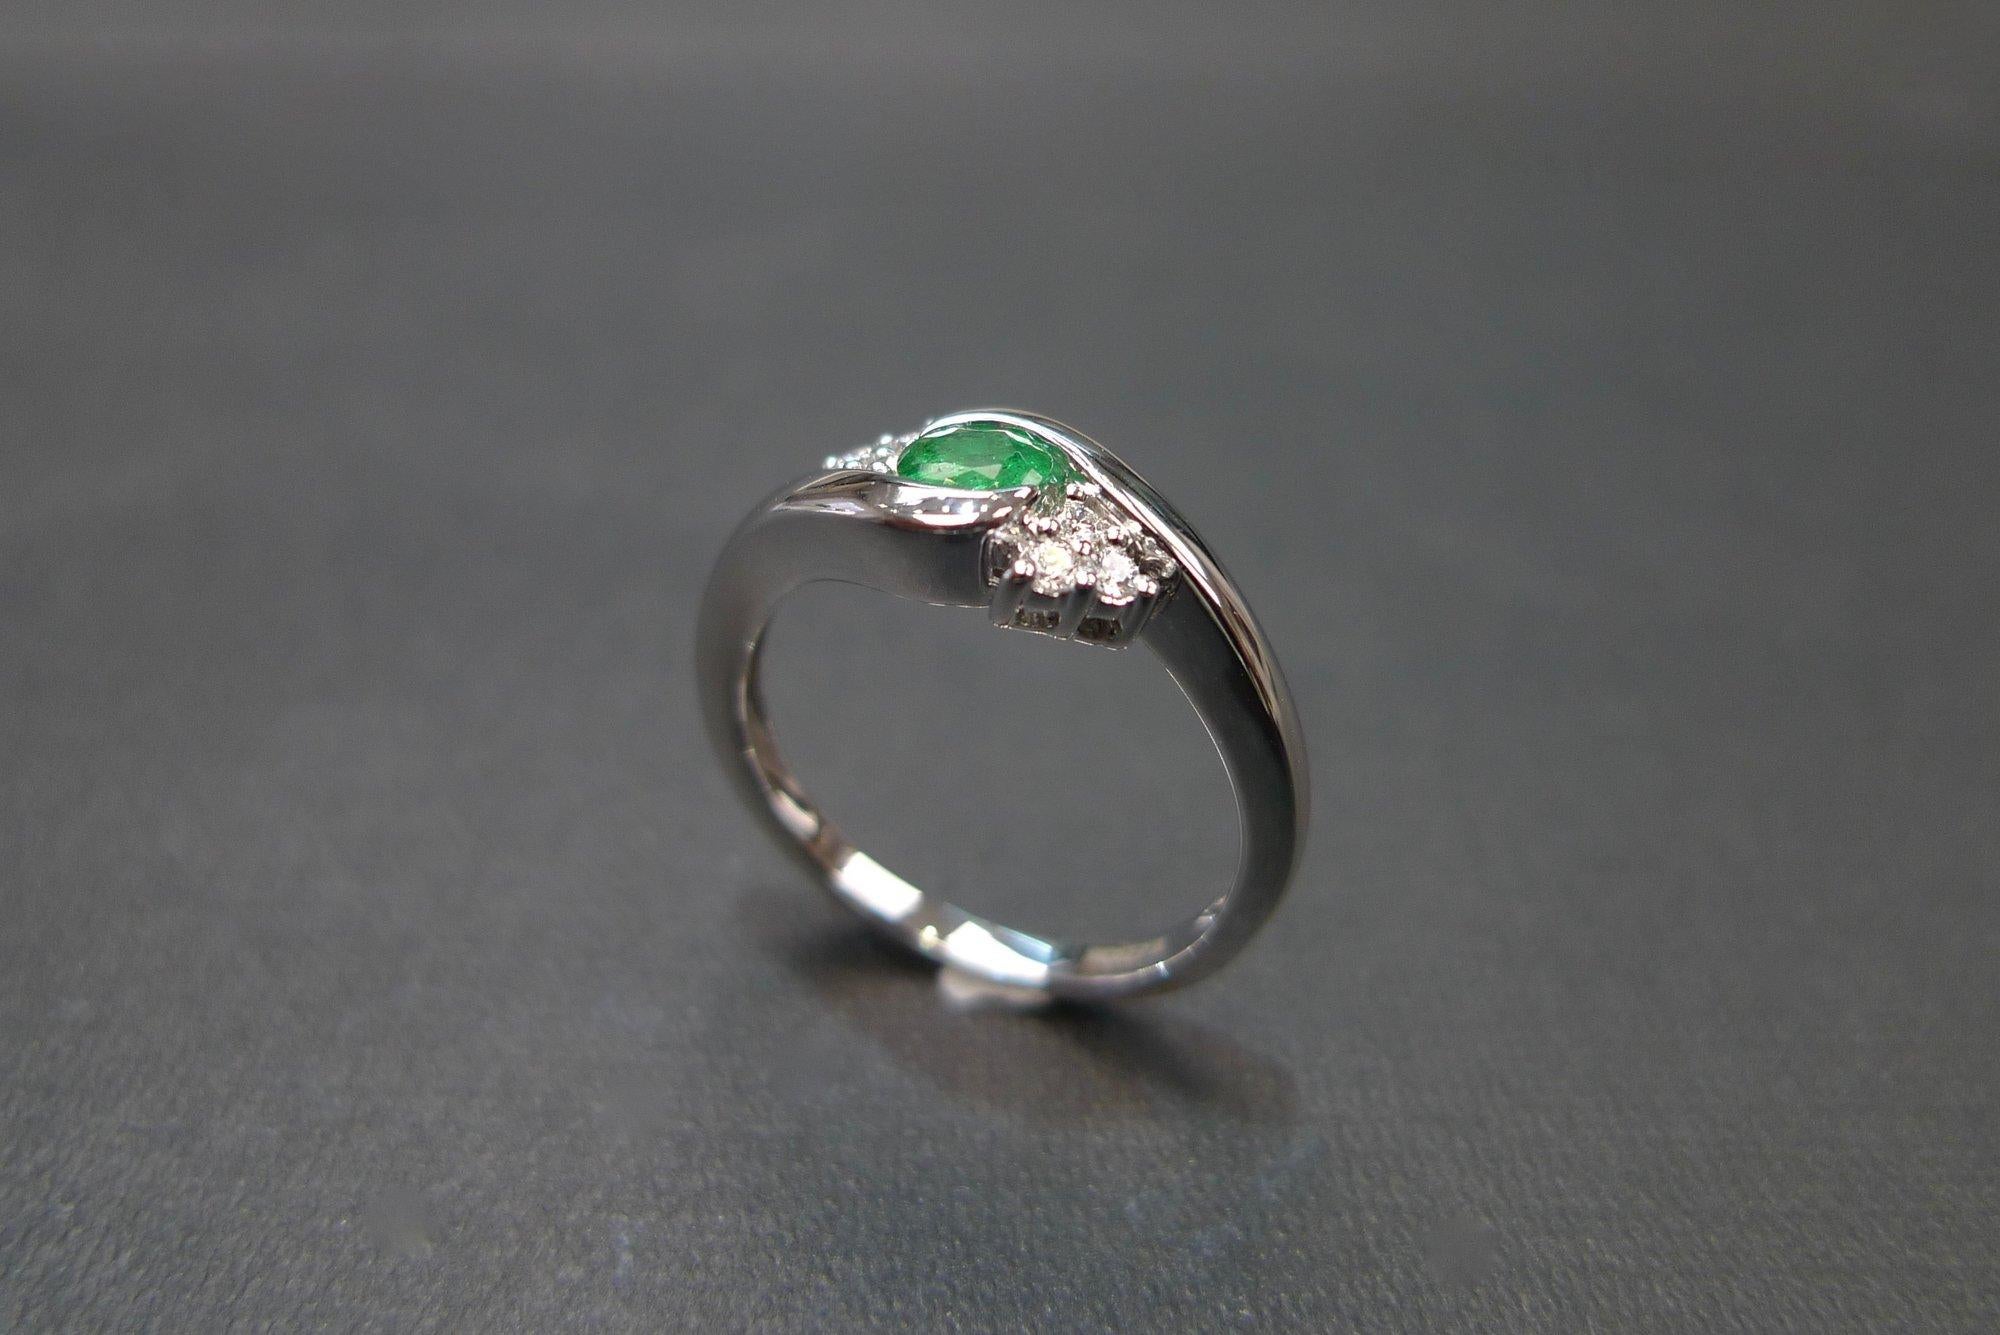 For Sale:  Tension Twist Round Cut Emerald and Diamond Engagement Ring in 18K White Gold 4